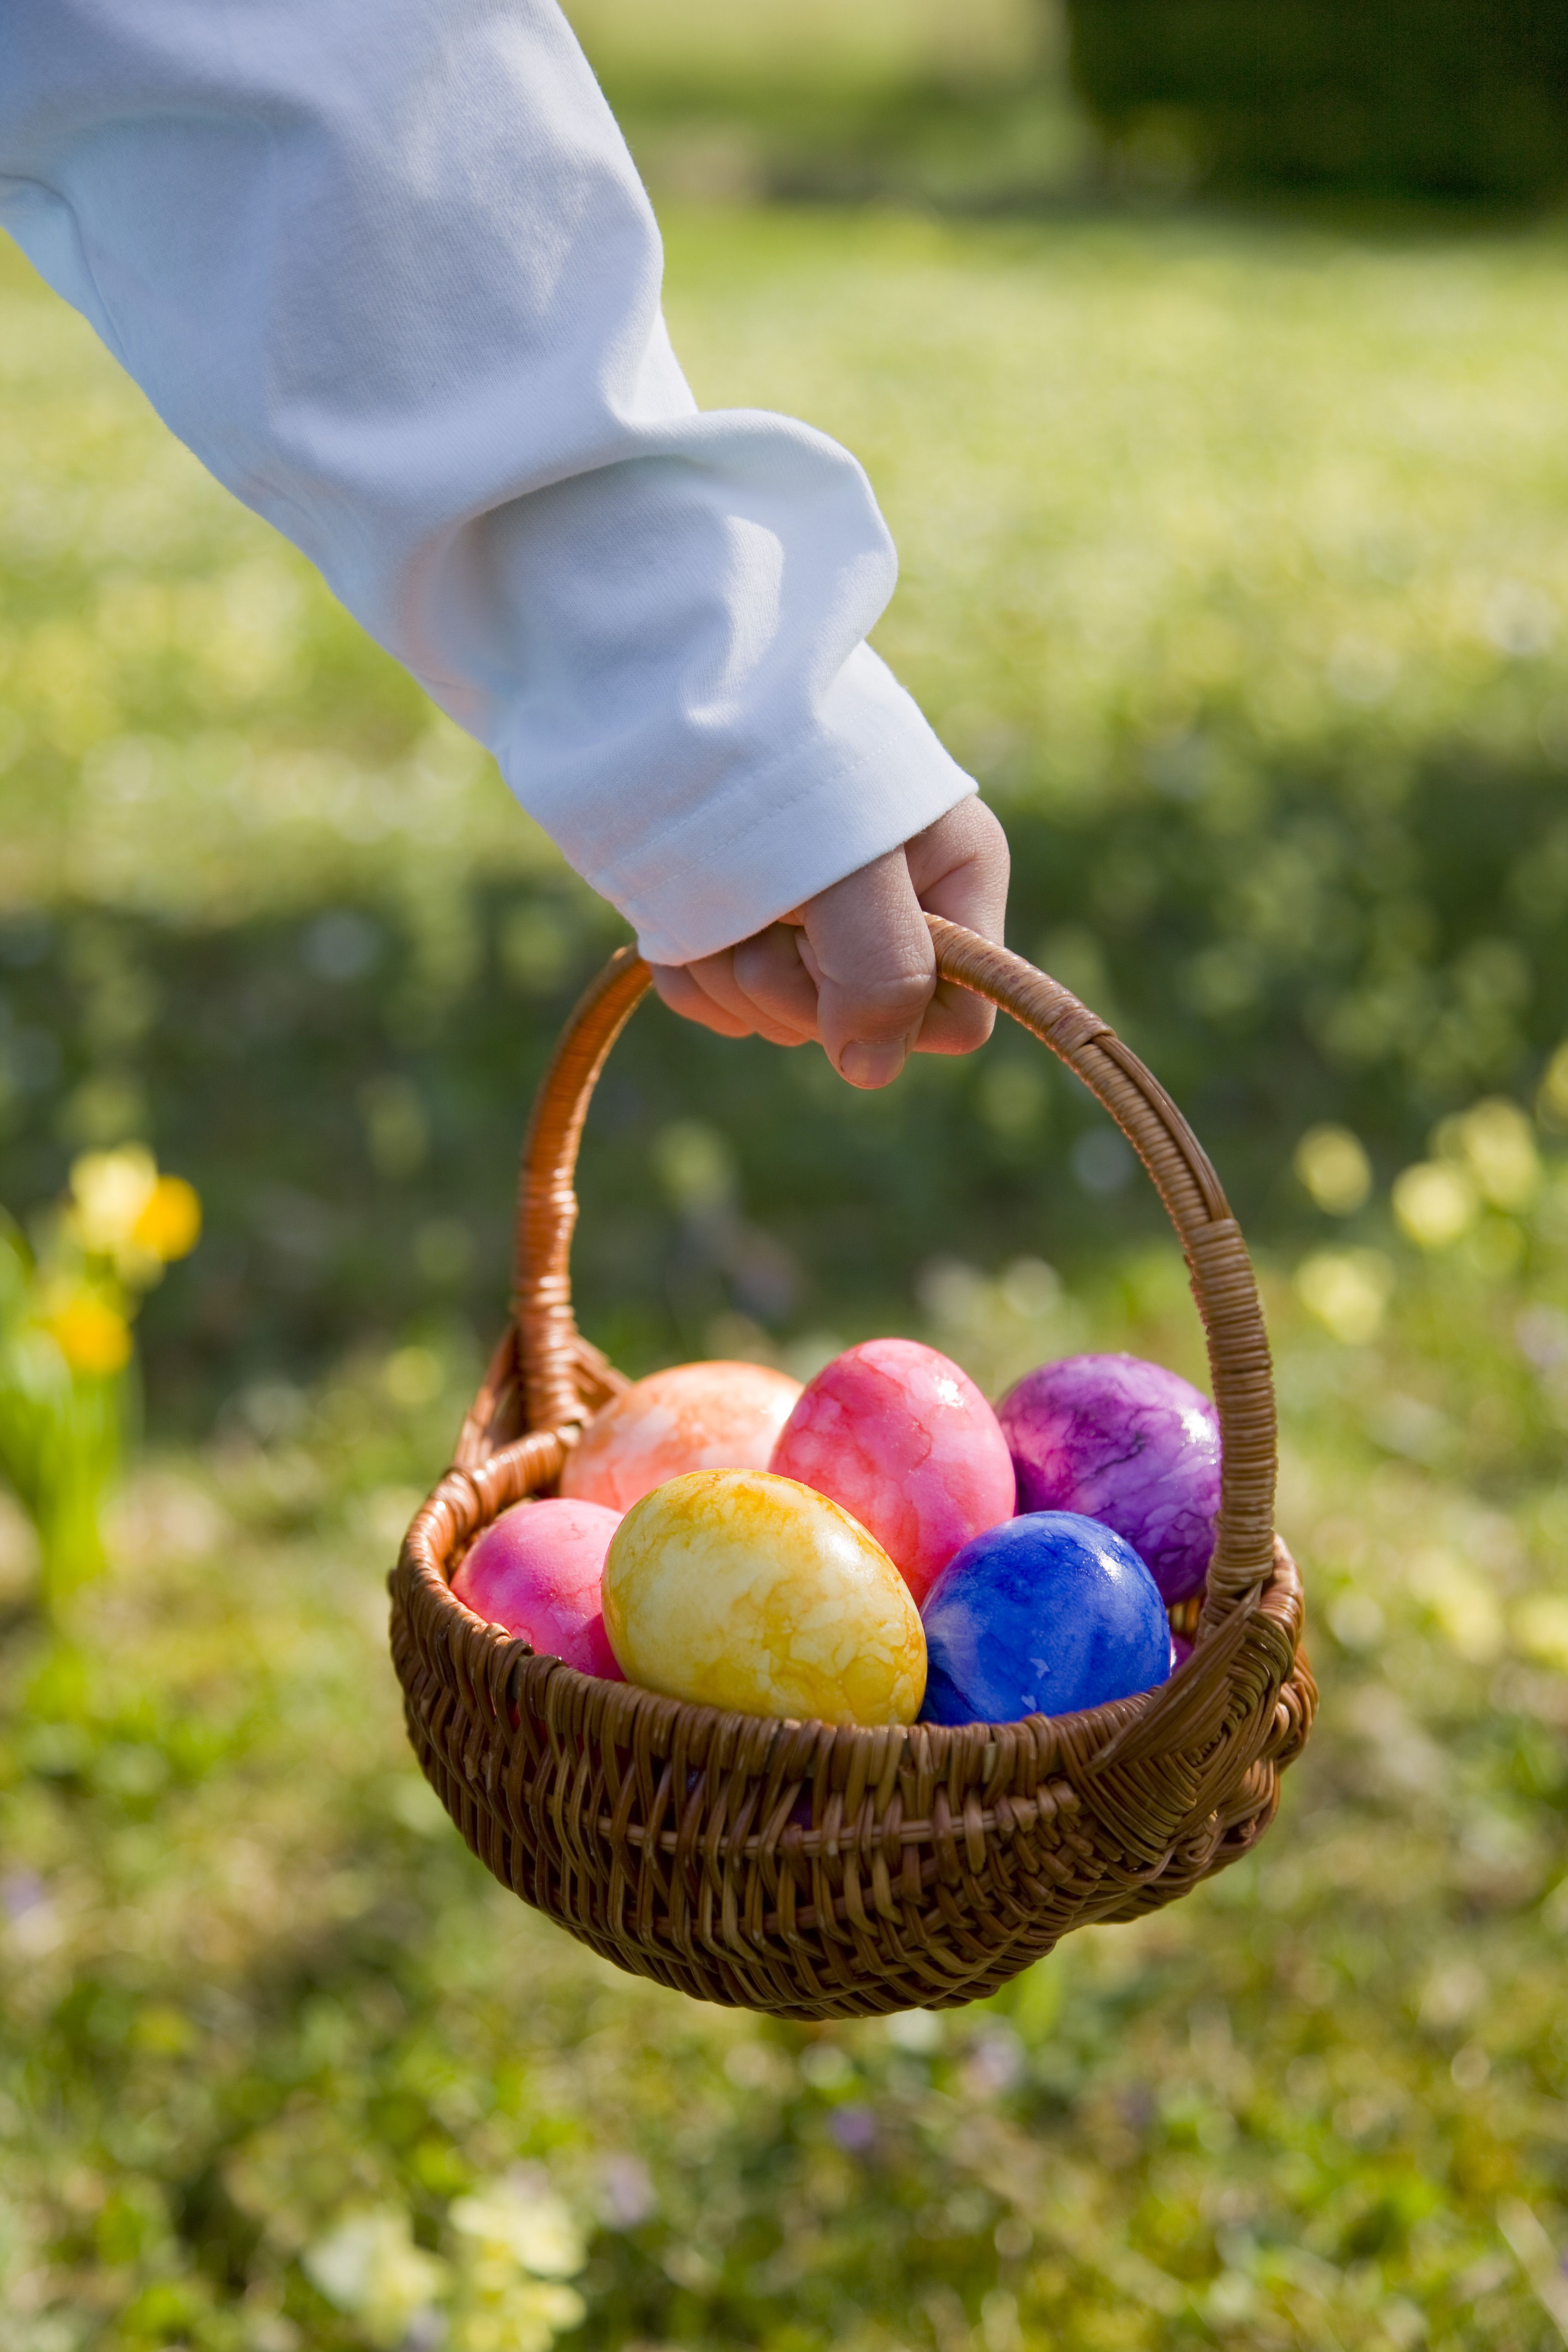 32 Great Easter Egg Hunt Ideas For Kids Of All Ages lupon.gov.ph